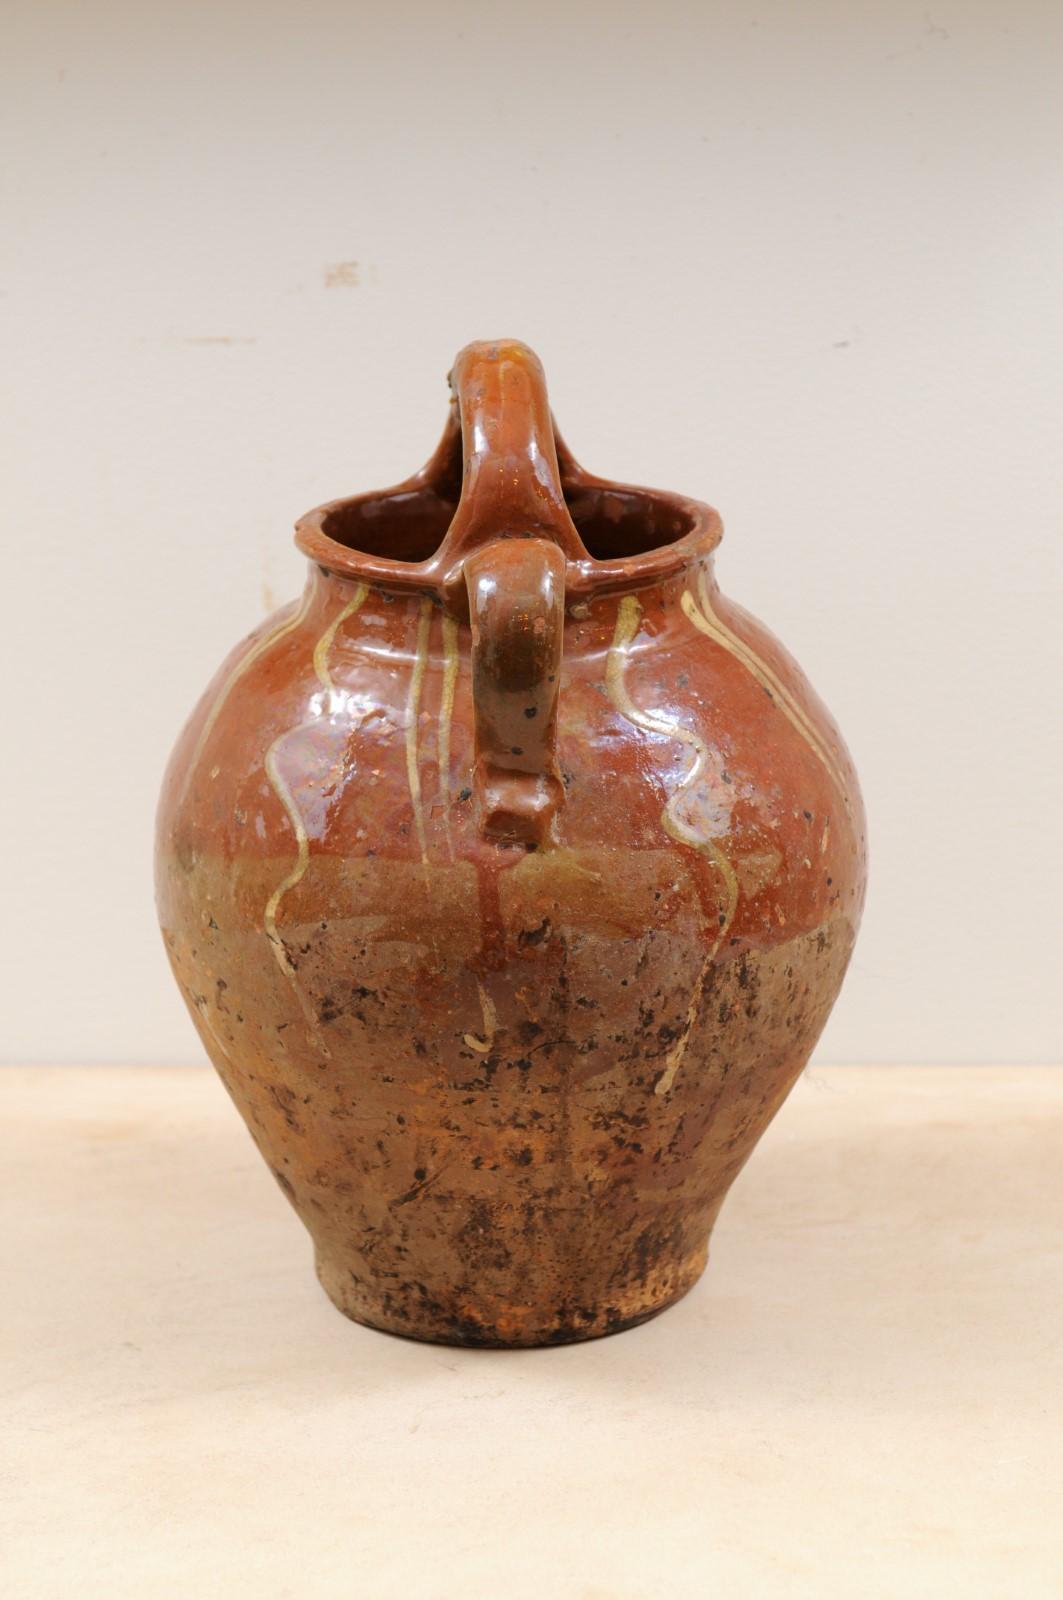 Rustic French Glazed Terracotta 19th Century Oil Jug with Distressed Appearance For Sale 4